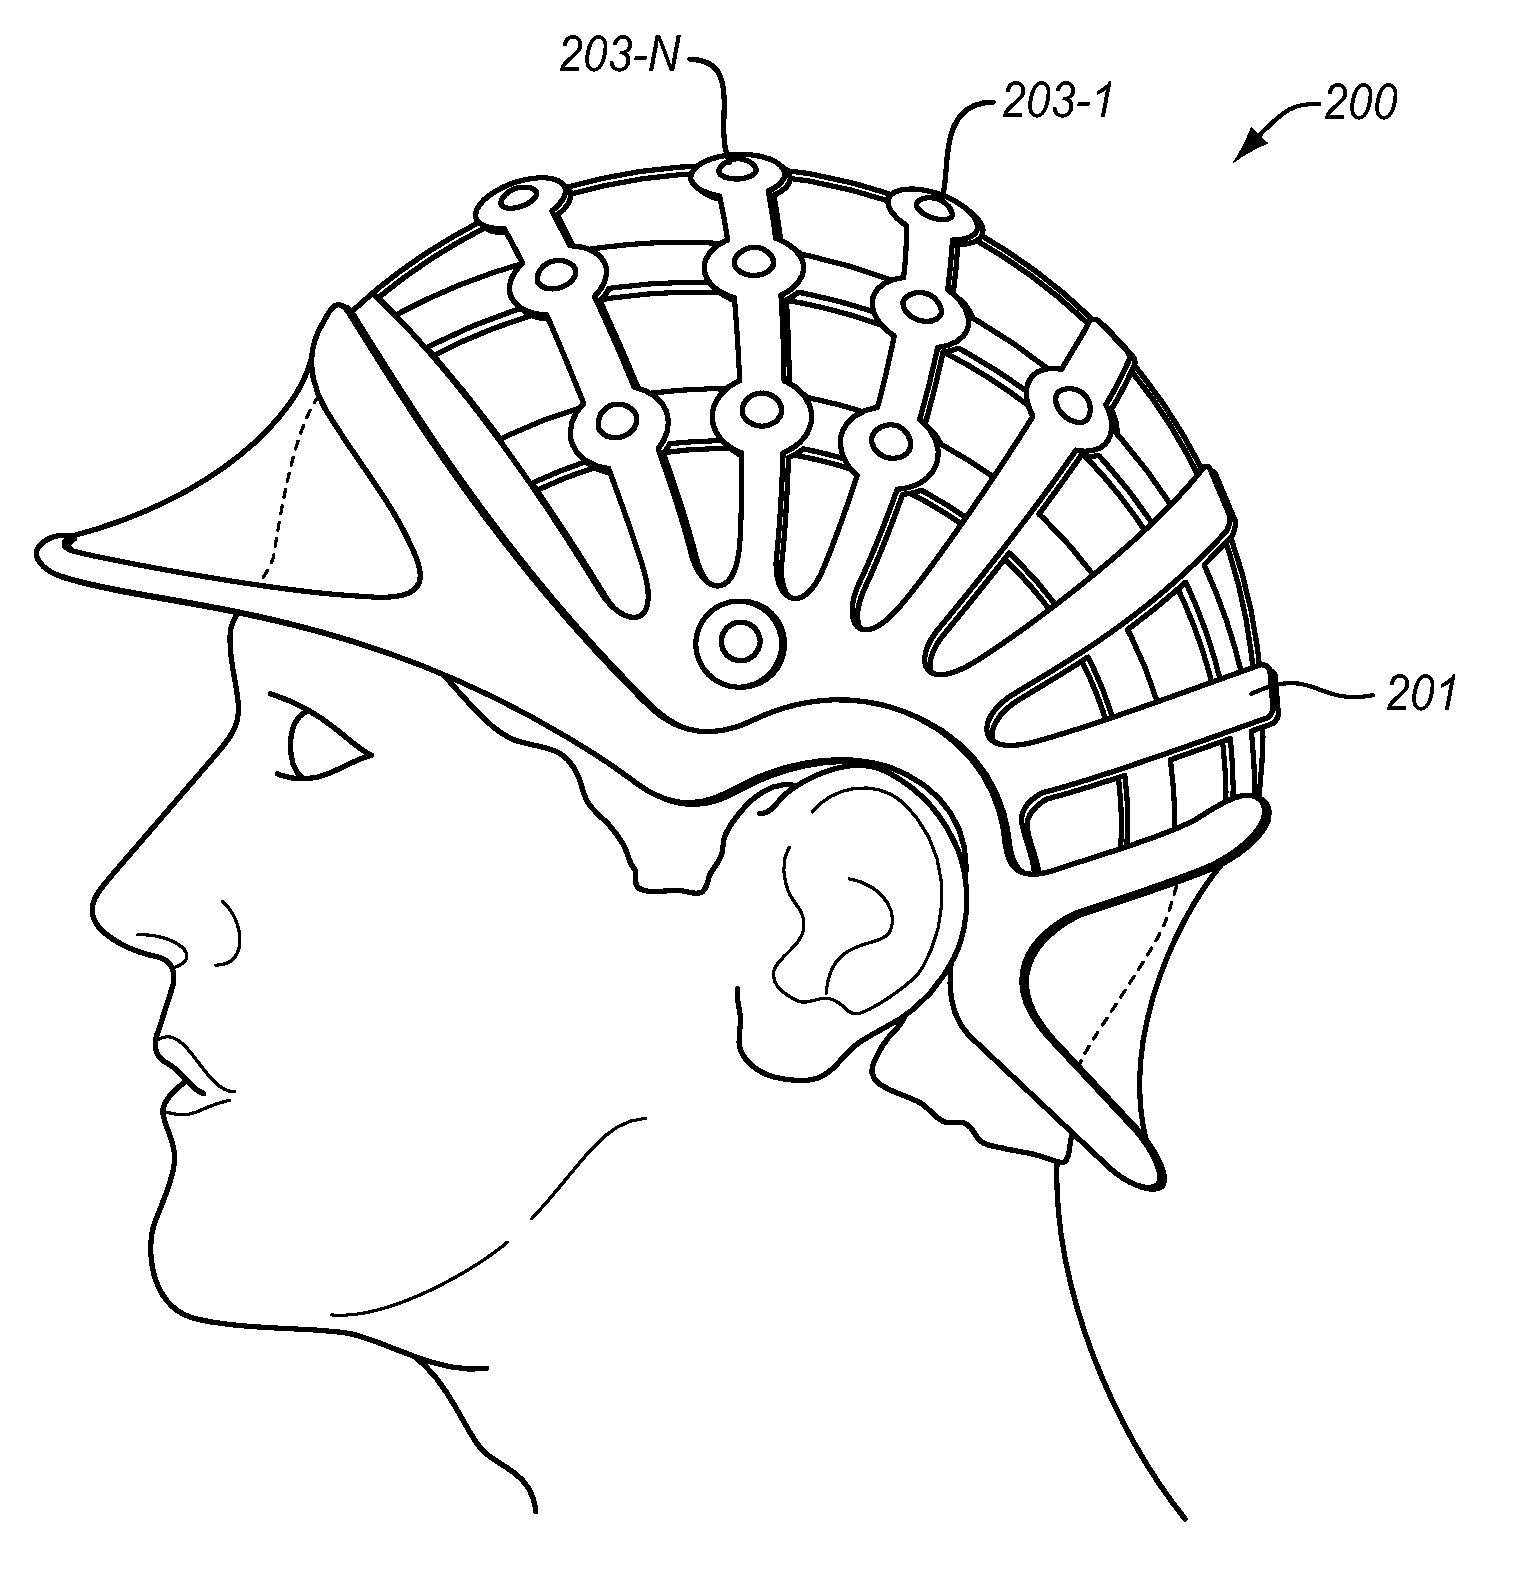 Medical apparatus for collecting patient electroencephalogram (EEG) data